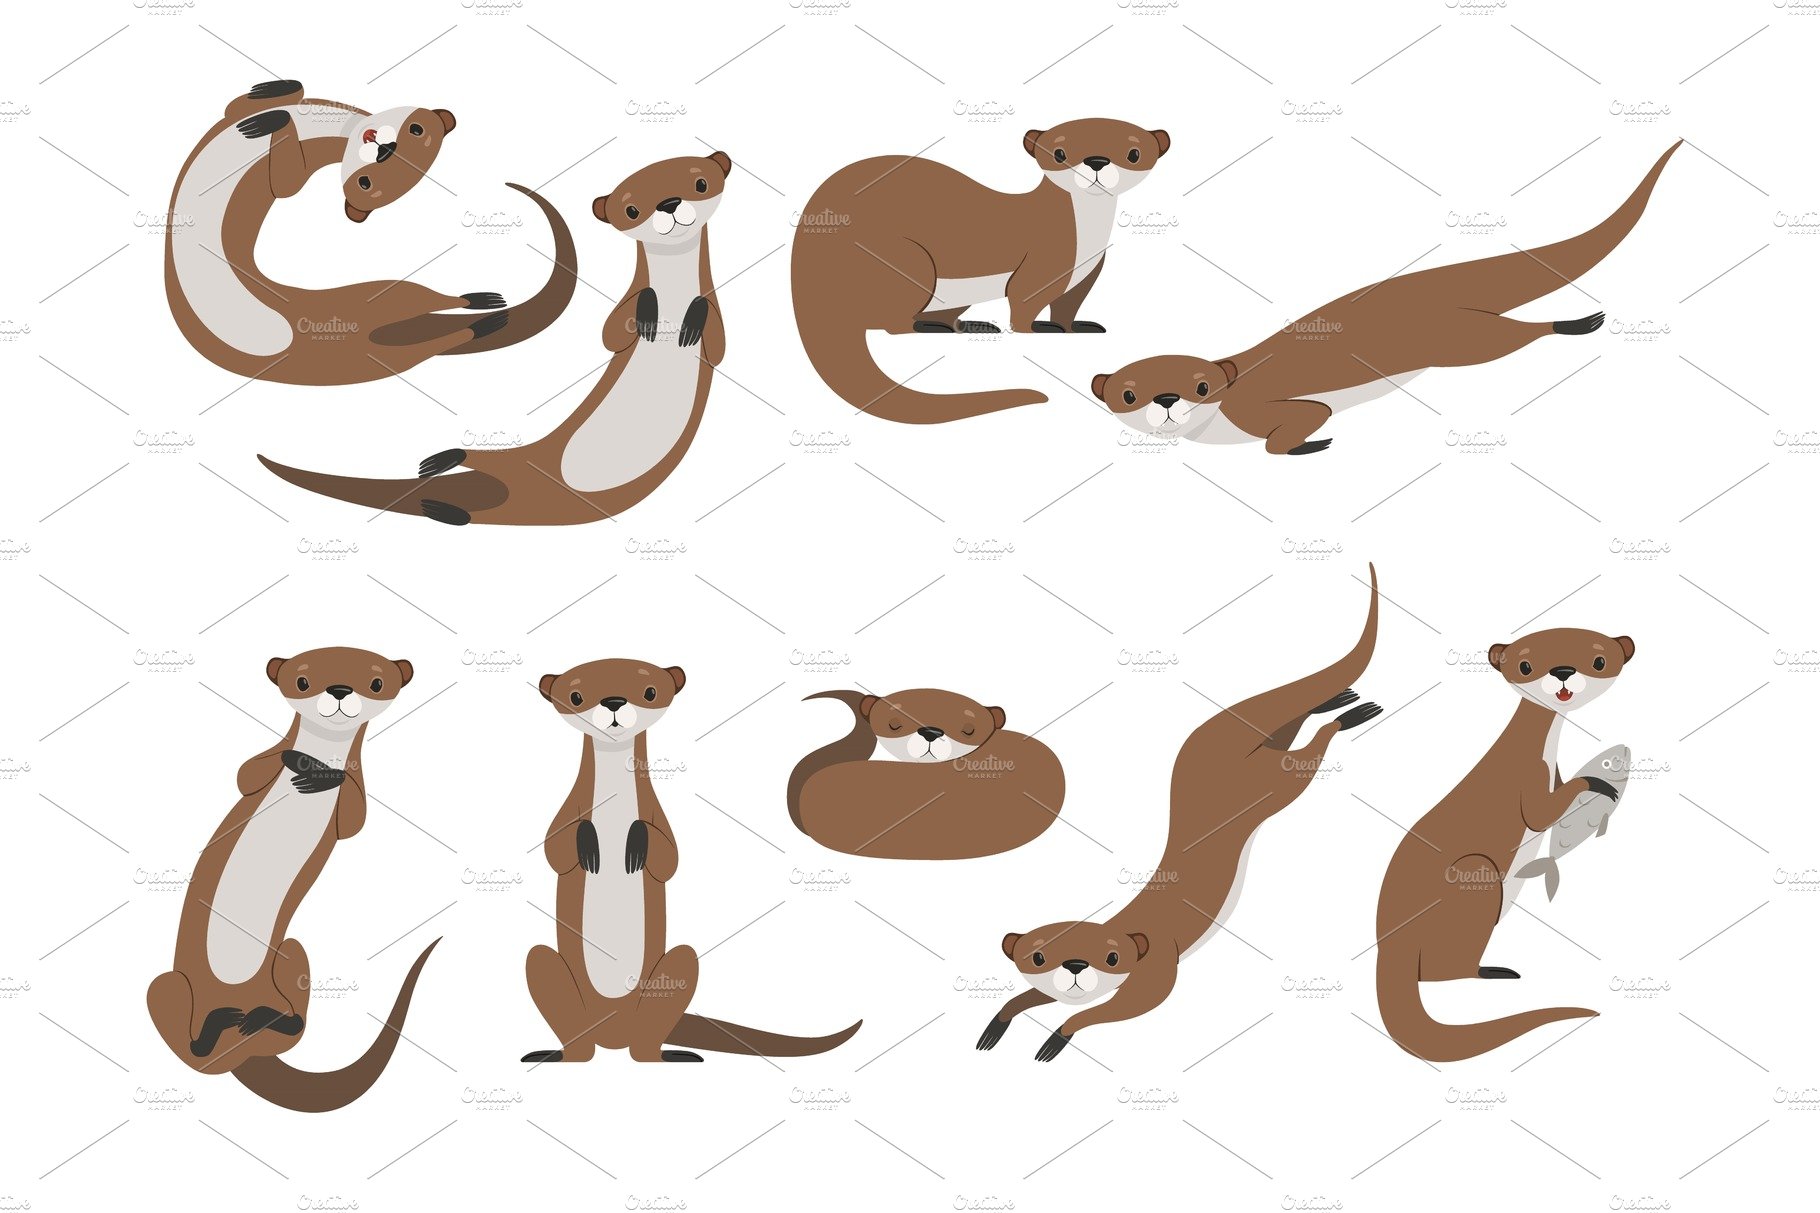 Cute otter set, funny animal cover image.